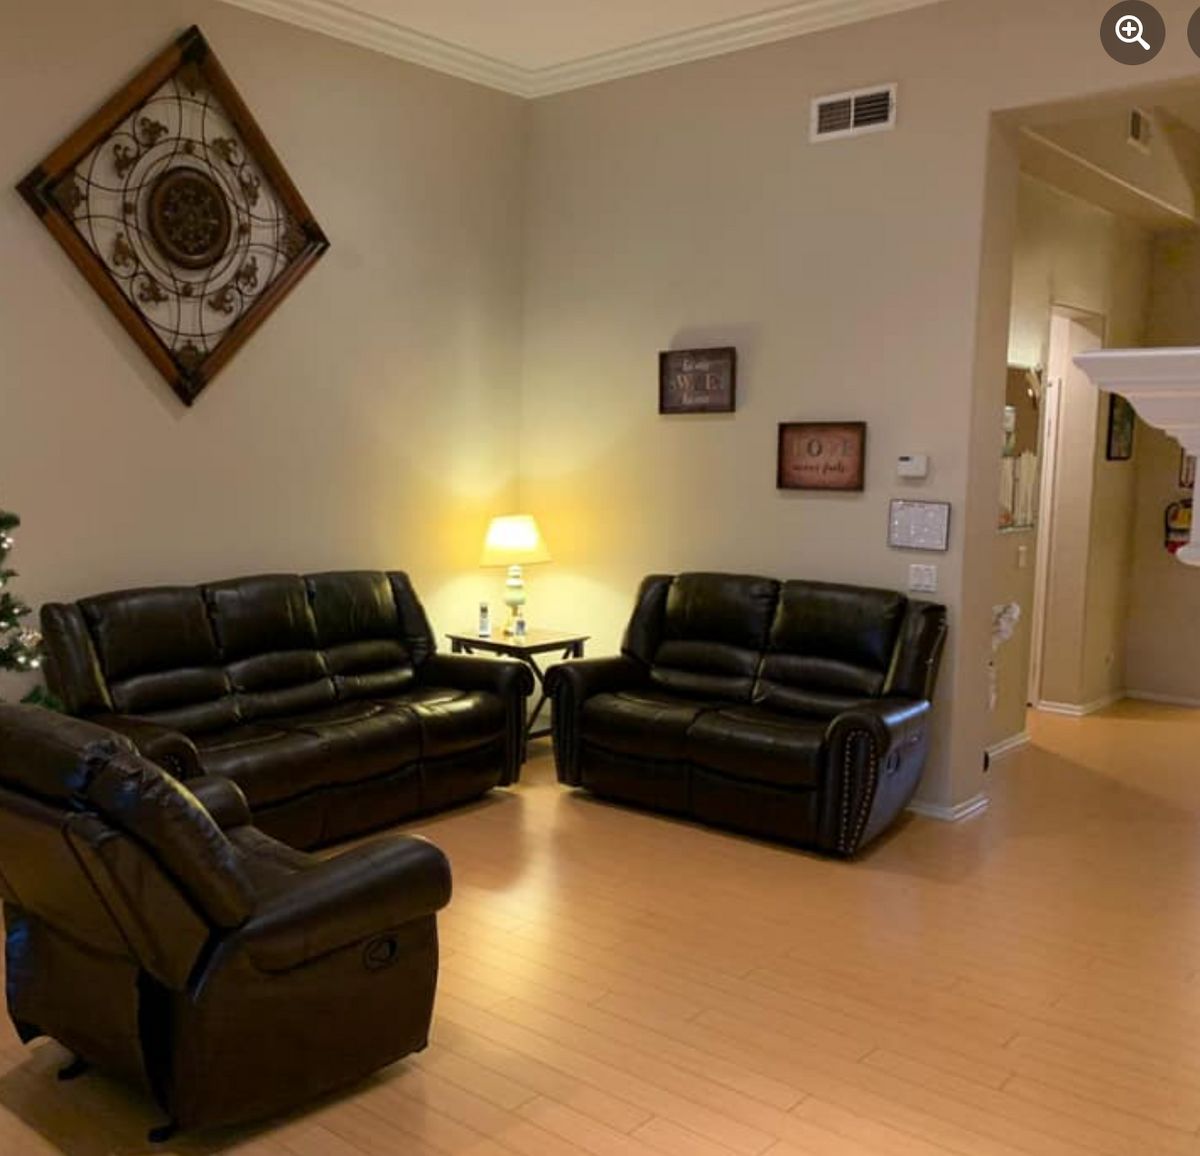 Interior view of Mira Loma Senior Care living room with furniture, art, and architecture.